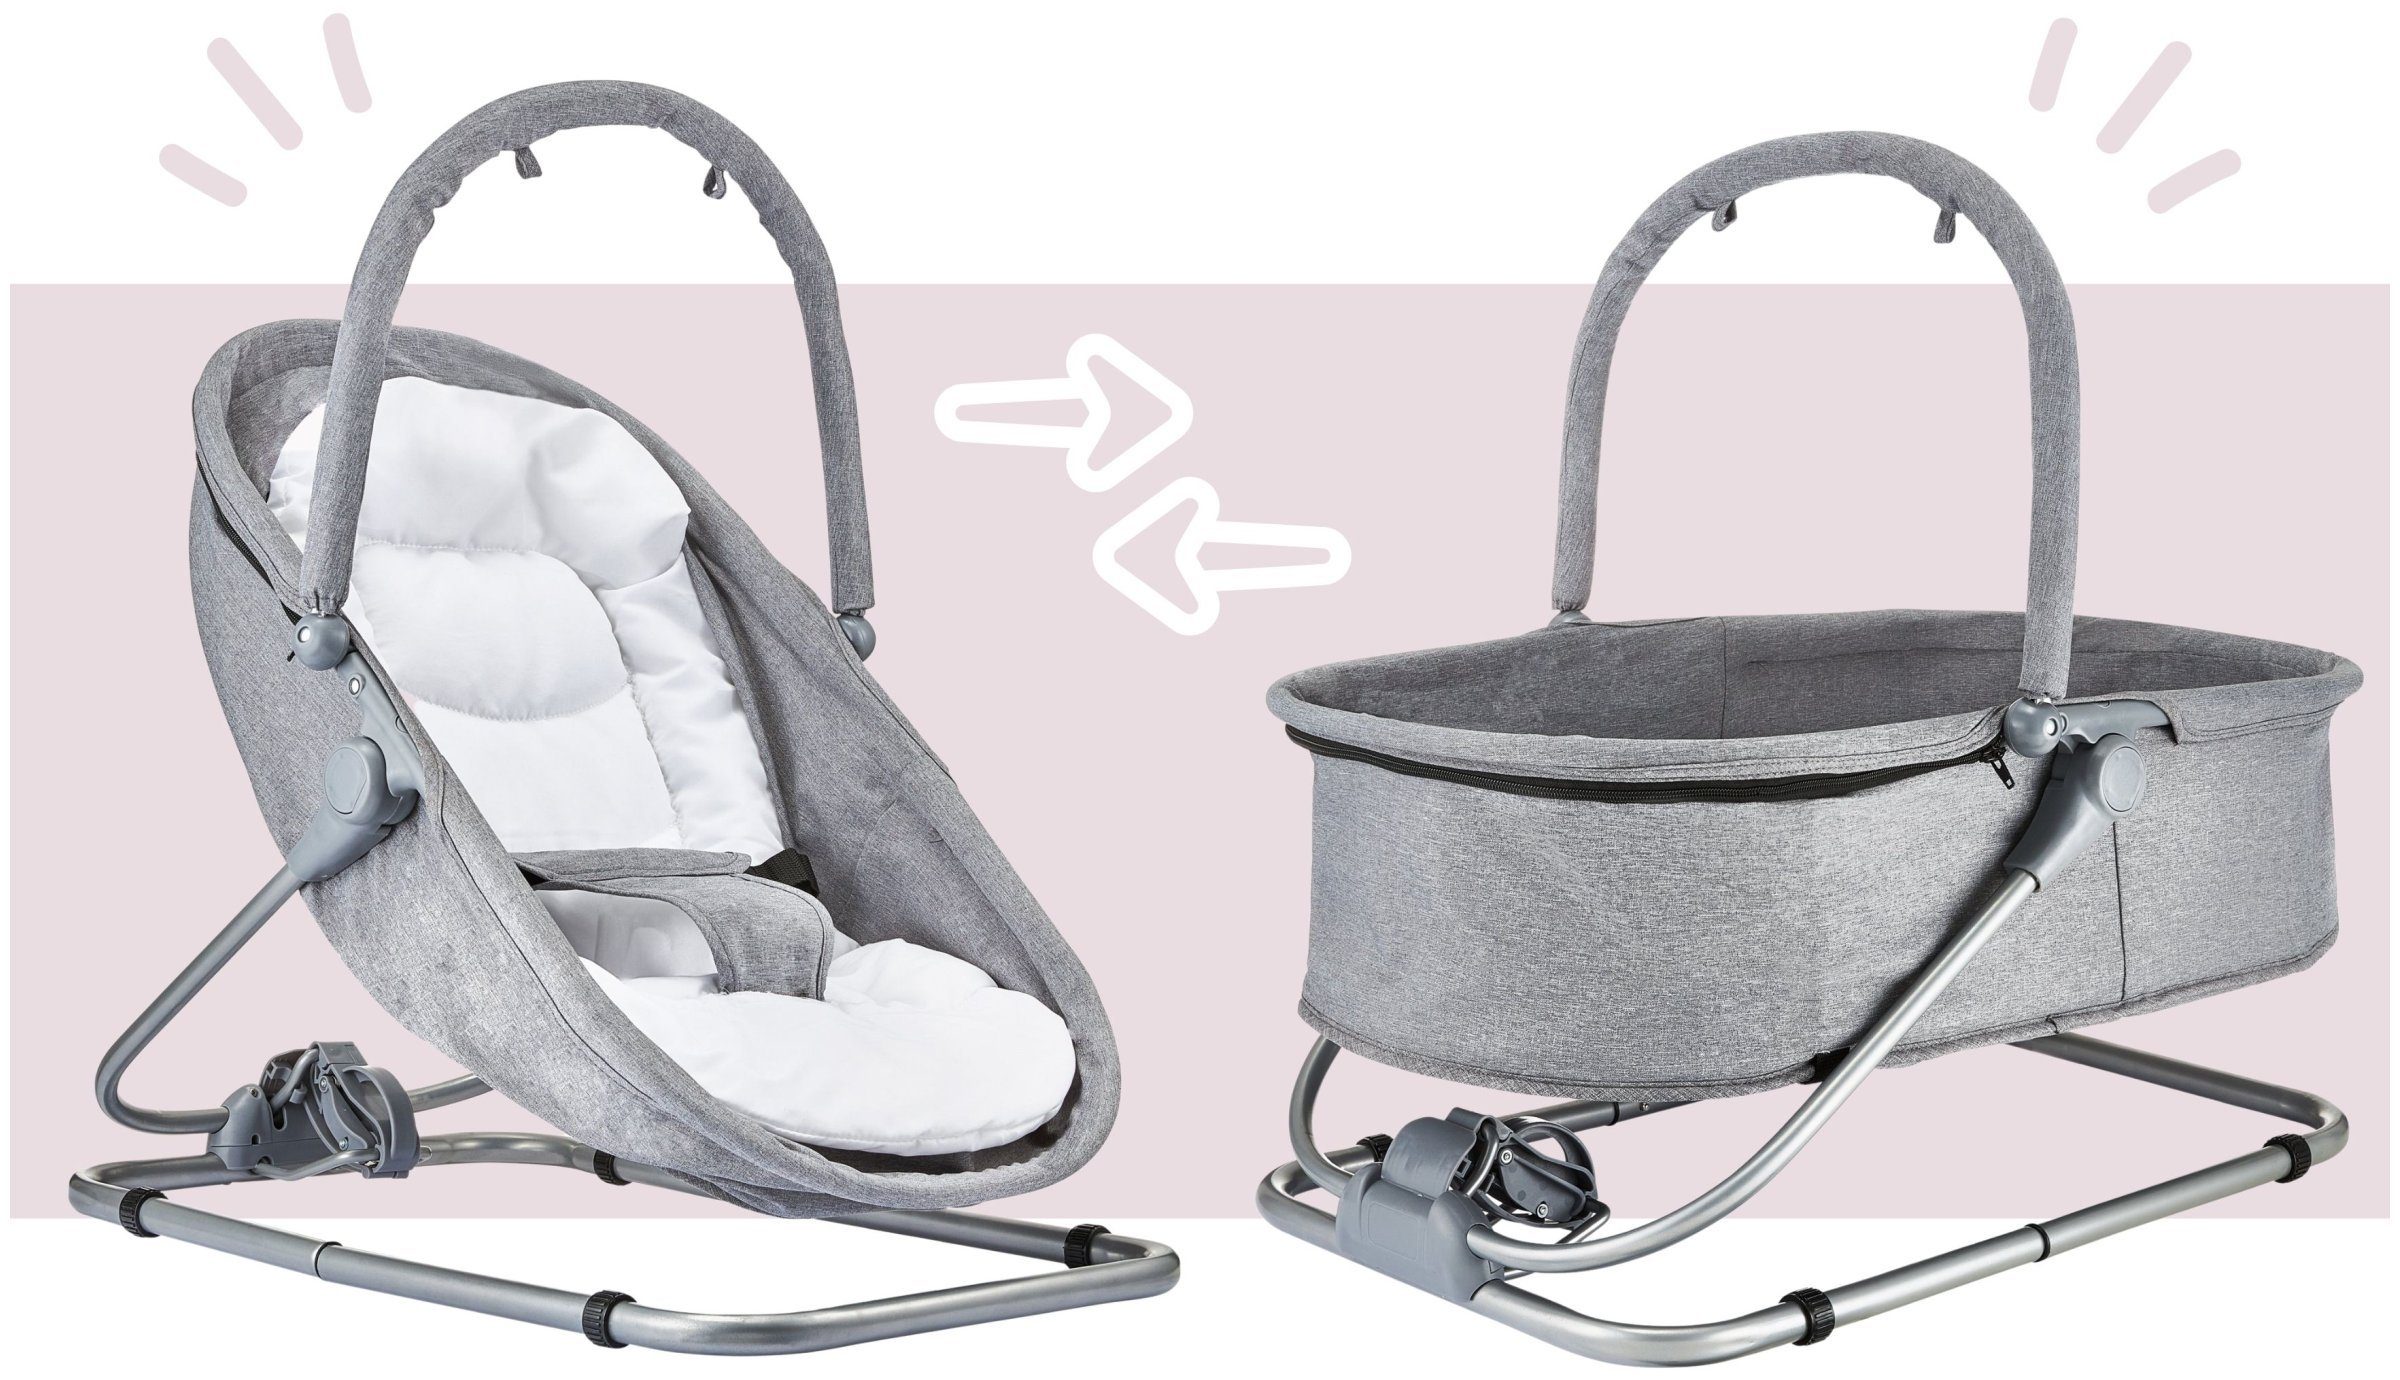 Moby-System Babyschaukel Liege + Wippe + Wiege 3in1 - Moby-System MILA